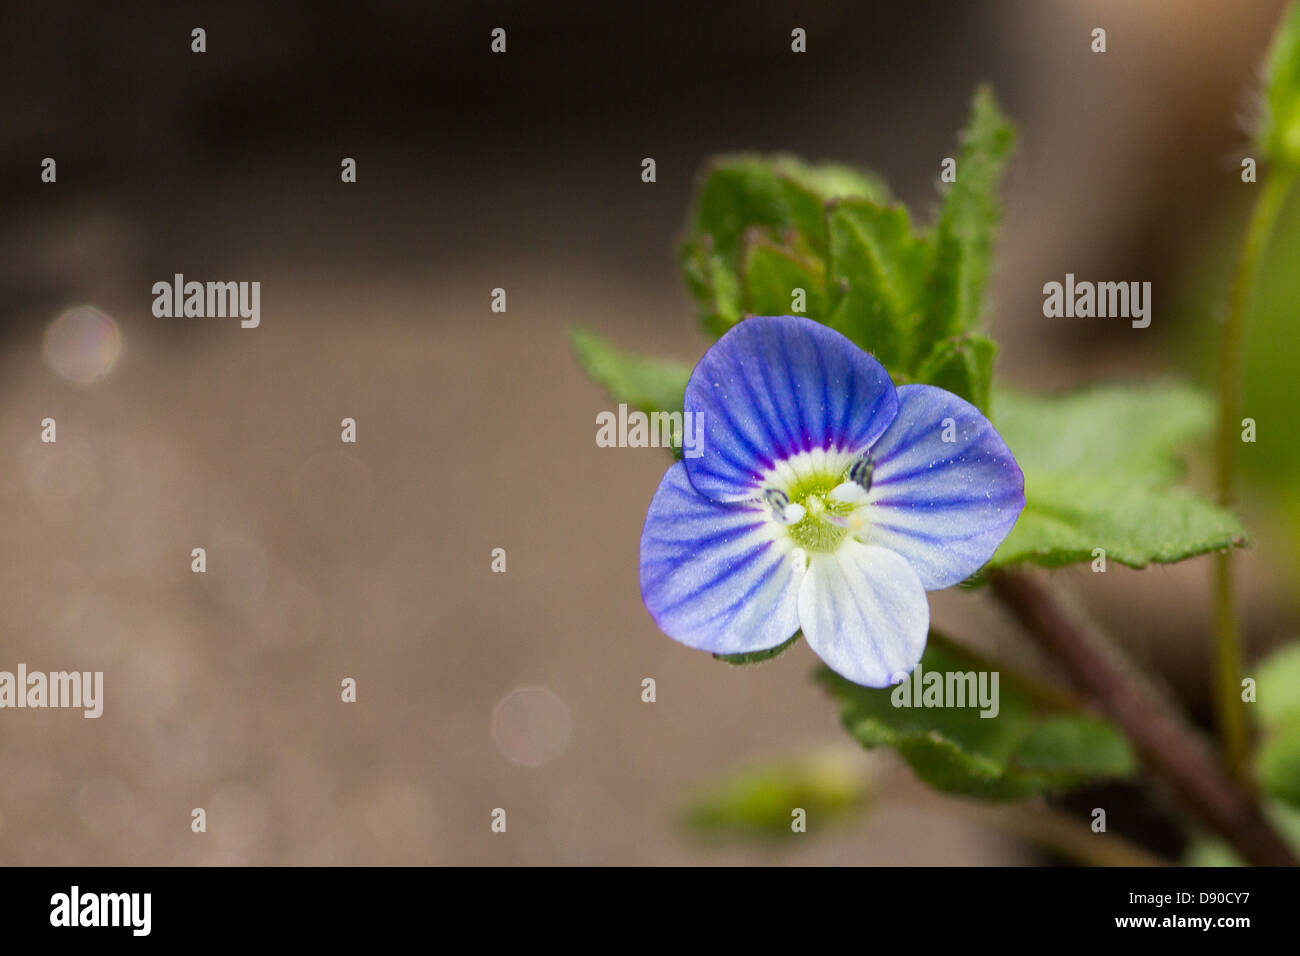 The Corn speedwell flower is rather dainty but quite attractive. Stock Photo